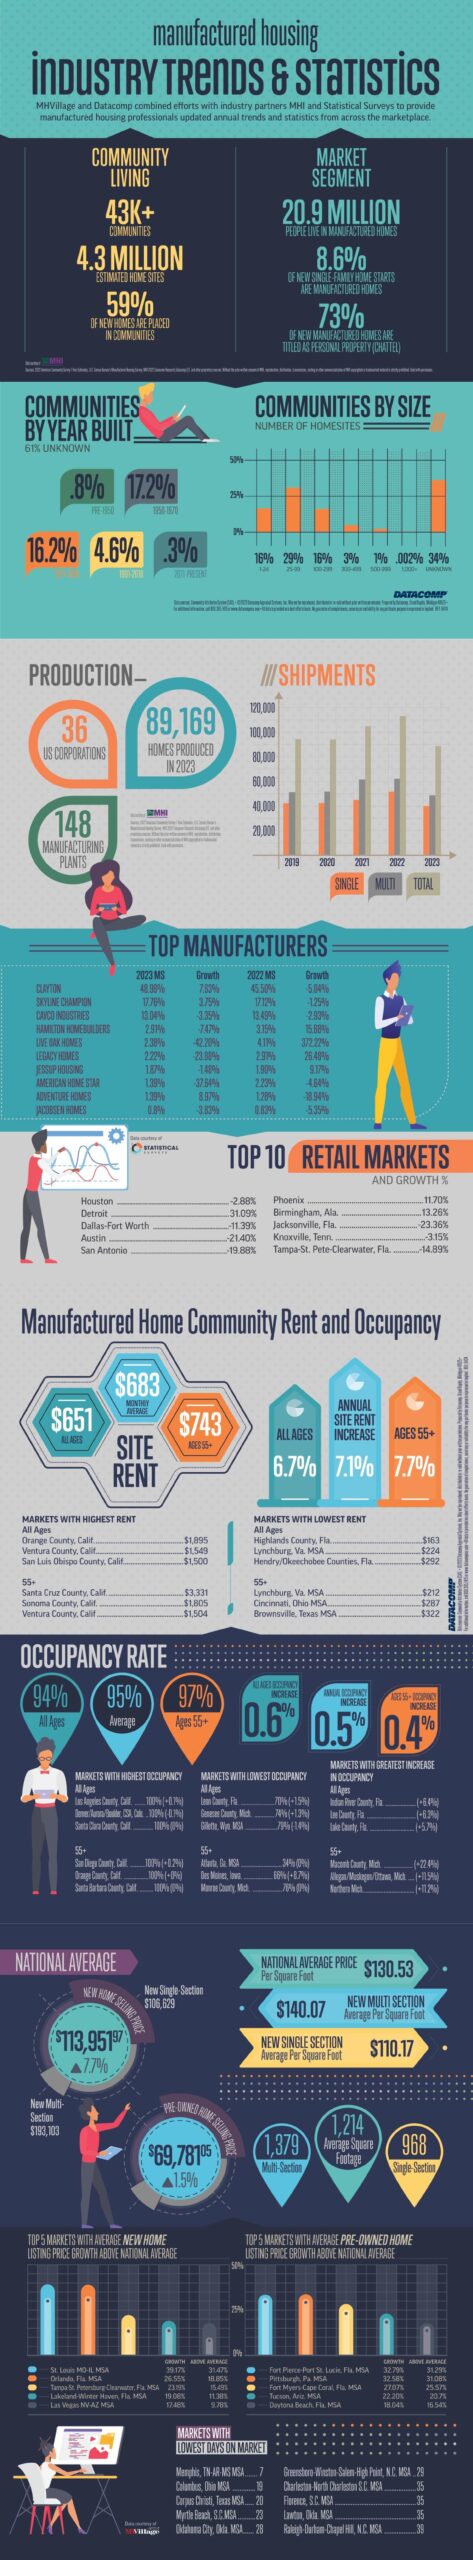 manufactured housing industry trends and statistics infographic 2024